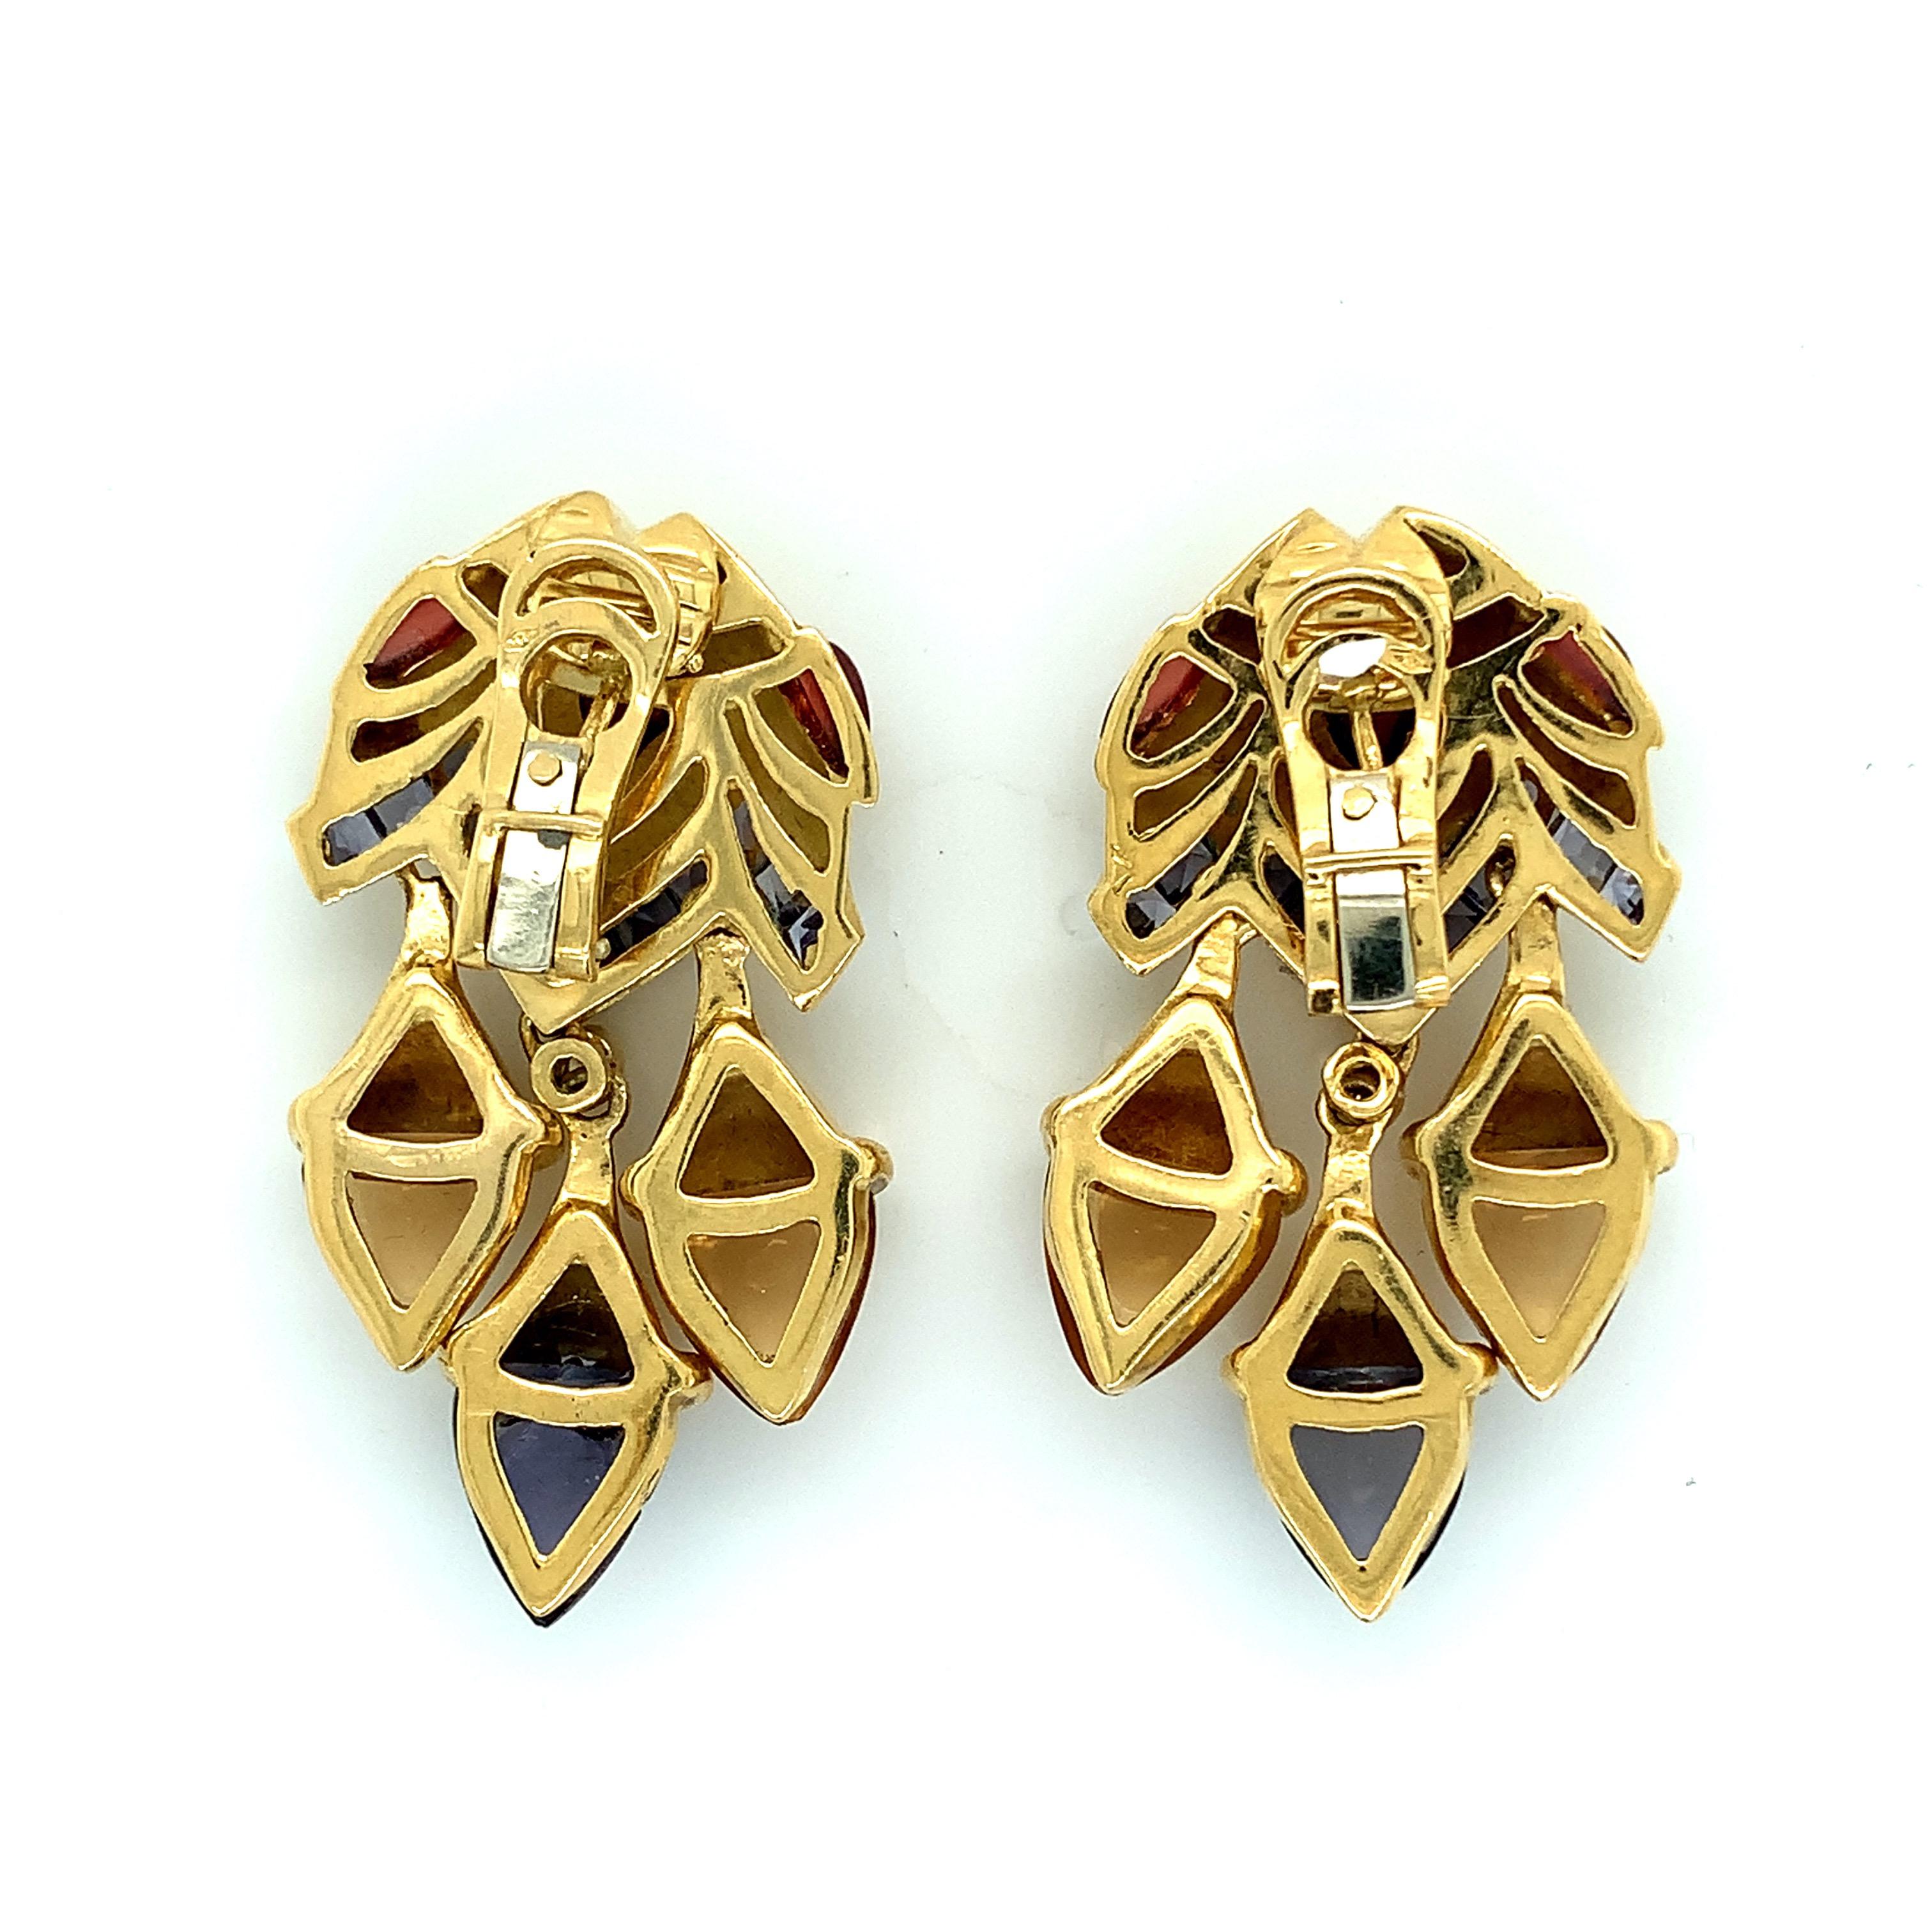 A pair of fun multi-stone ear clips including sapphire, iolite, garnet, and citrine set on 18 karat yellow gold, with a creative fish motif. Total weight: 38.0 grams. Width: 1 inch. Length: 1.75 inch. 